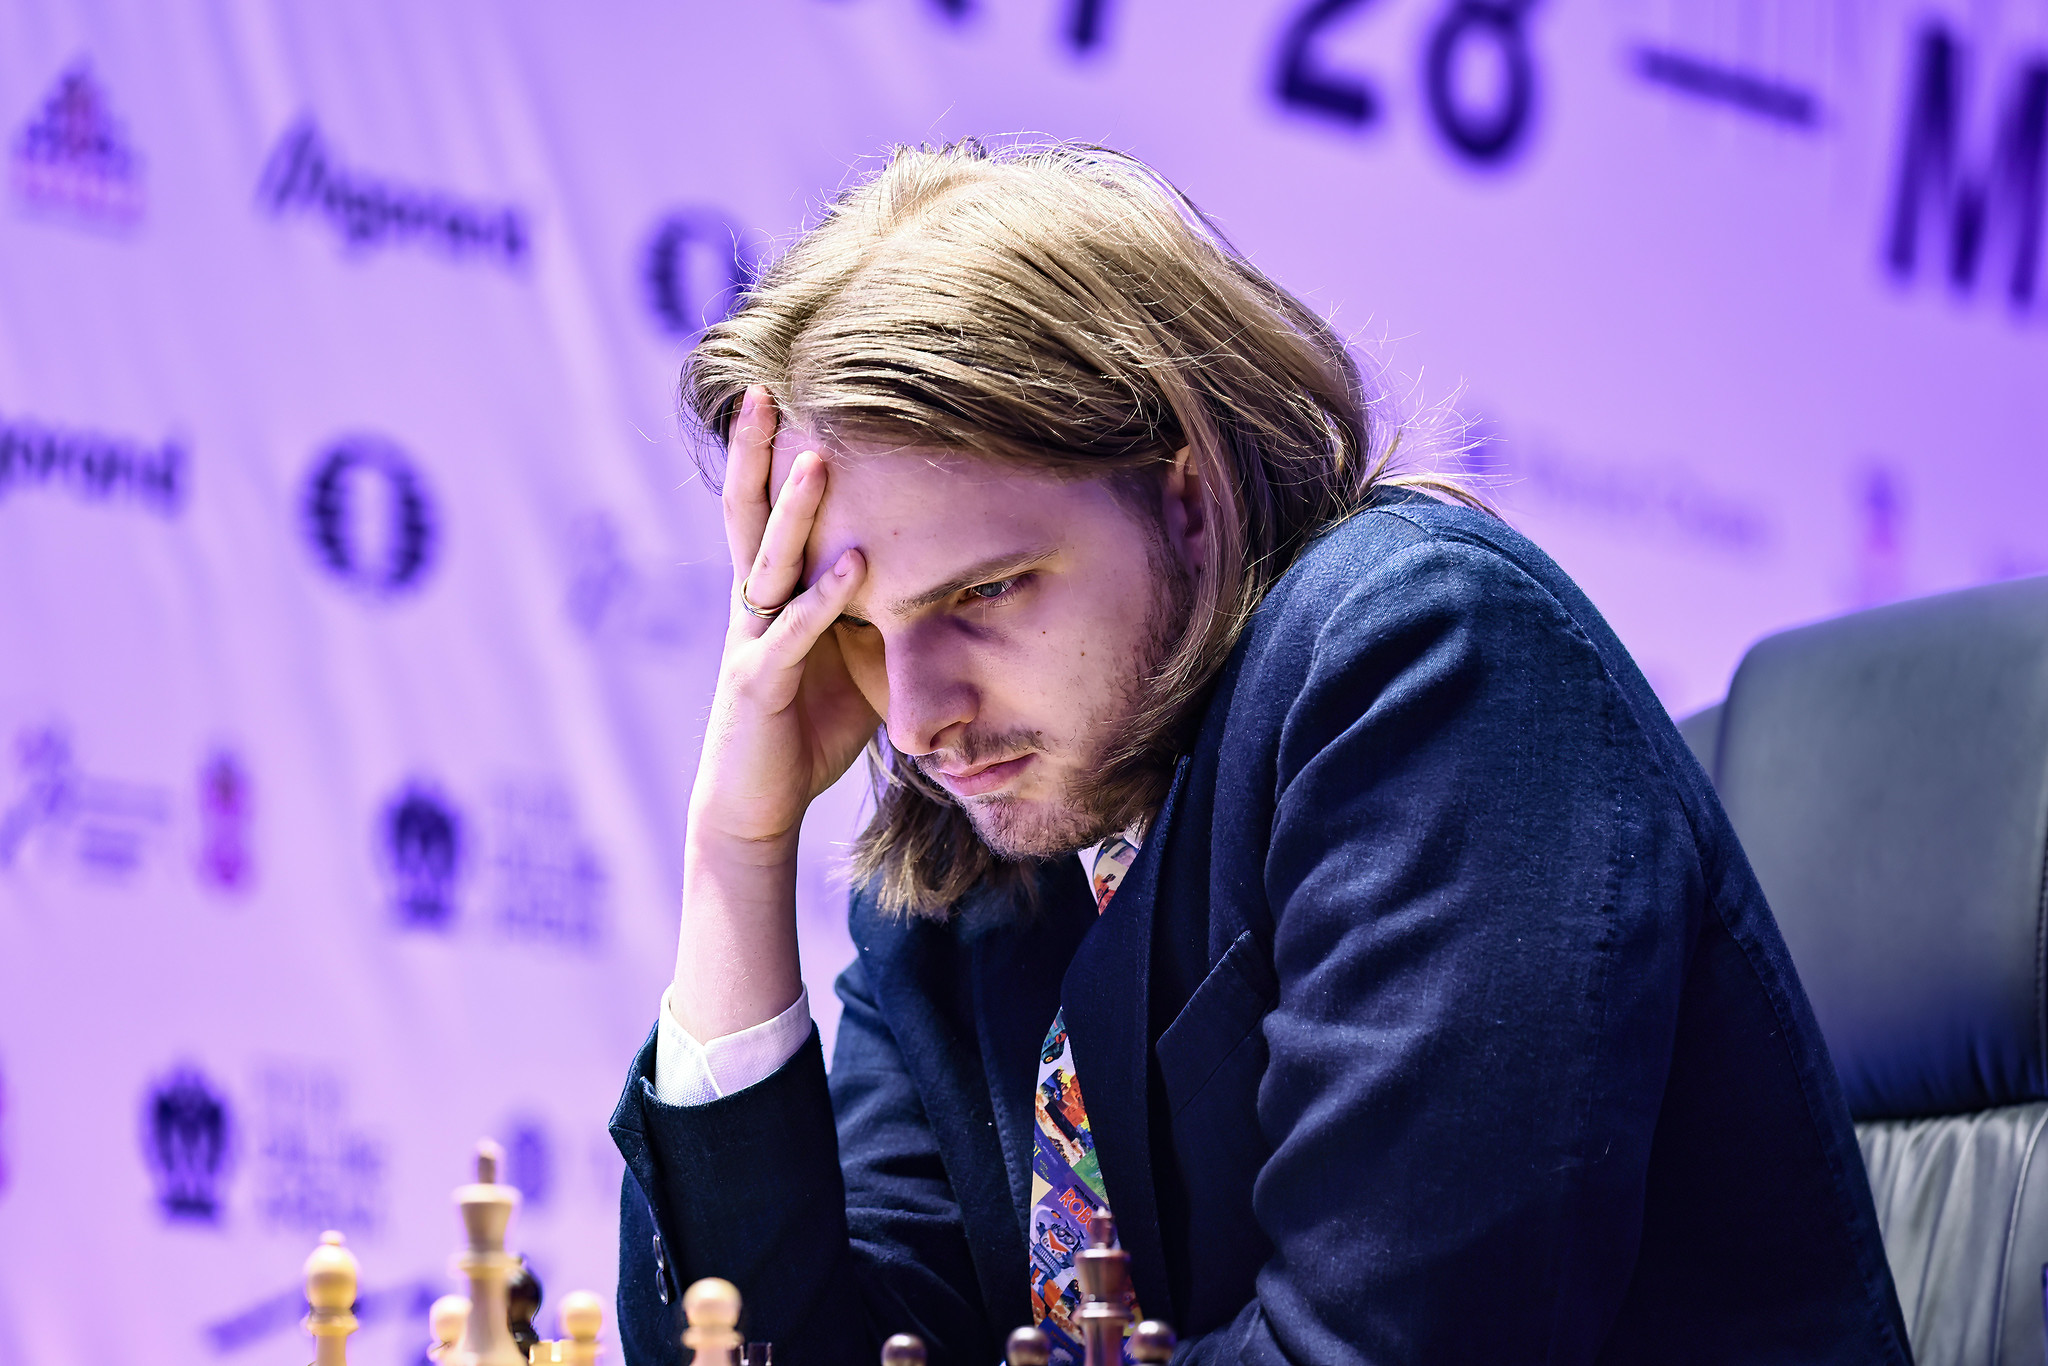 13 chess events that marked 2022